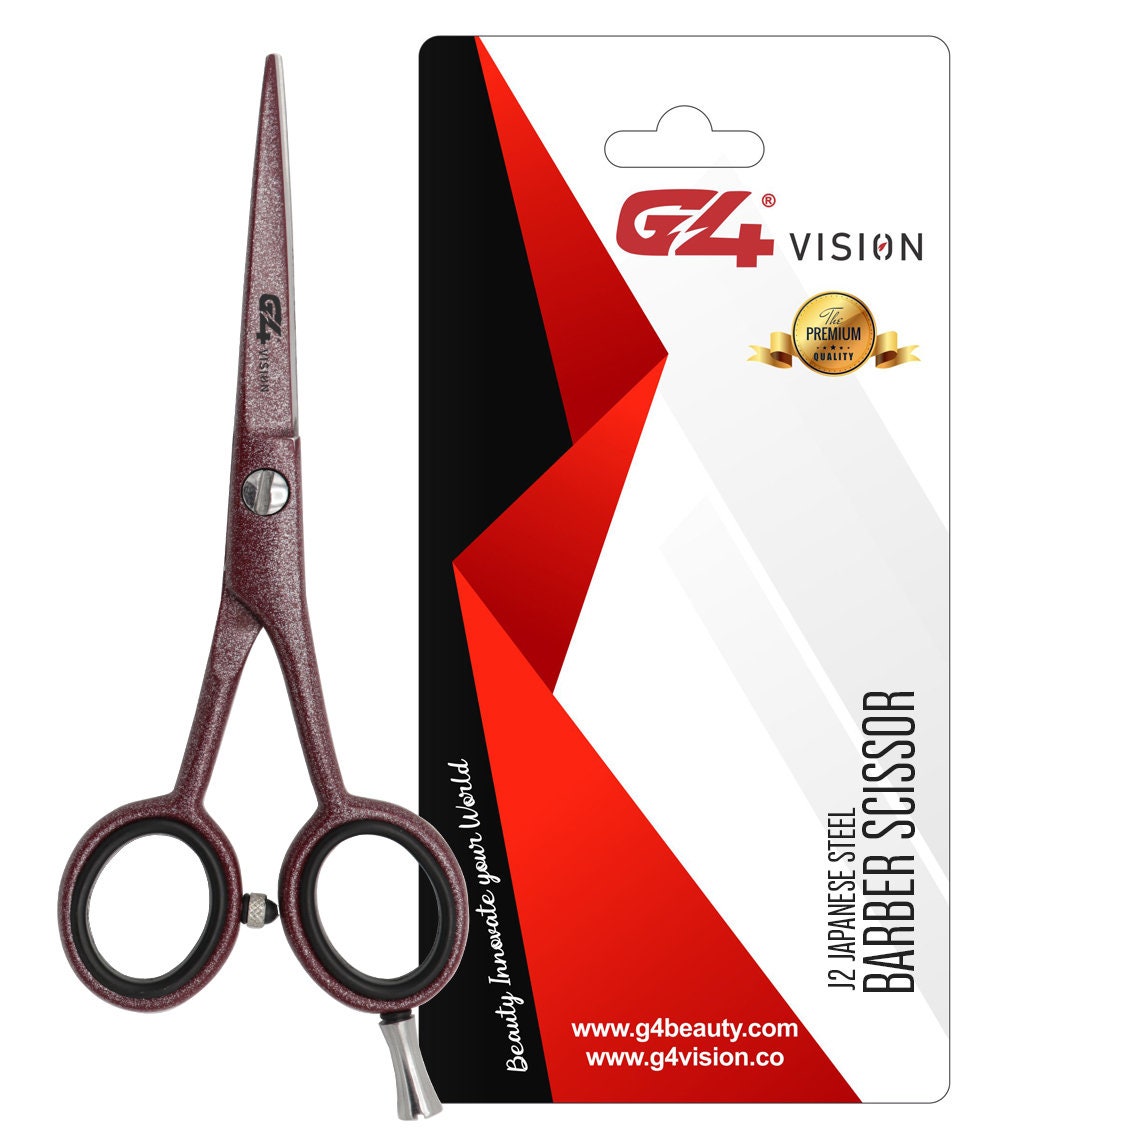 Styling Shears 5.5 Inches by Salon Care, Shears & Shapers